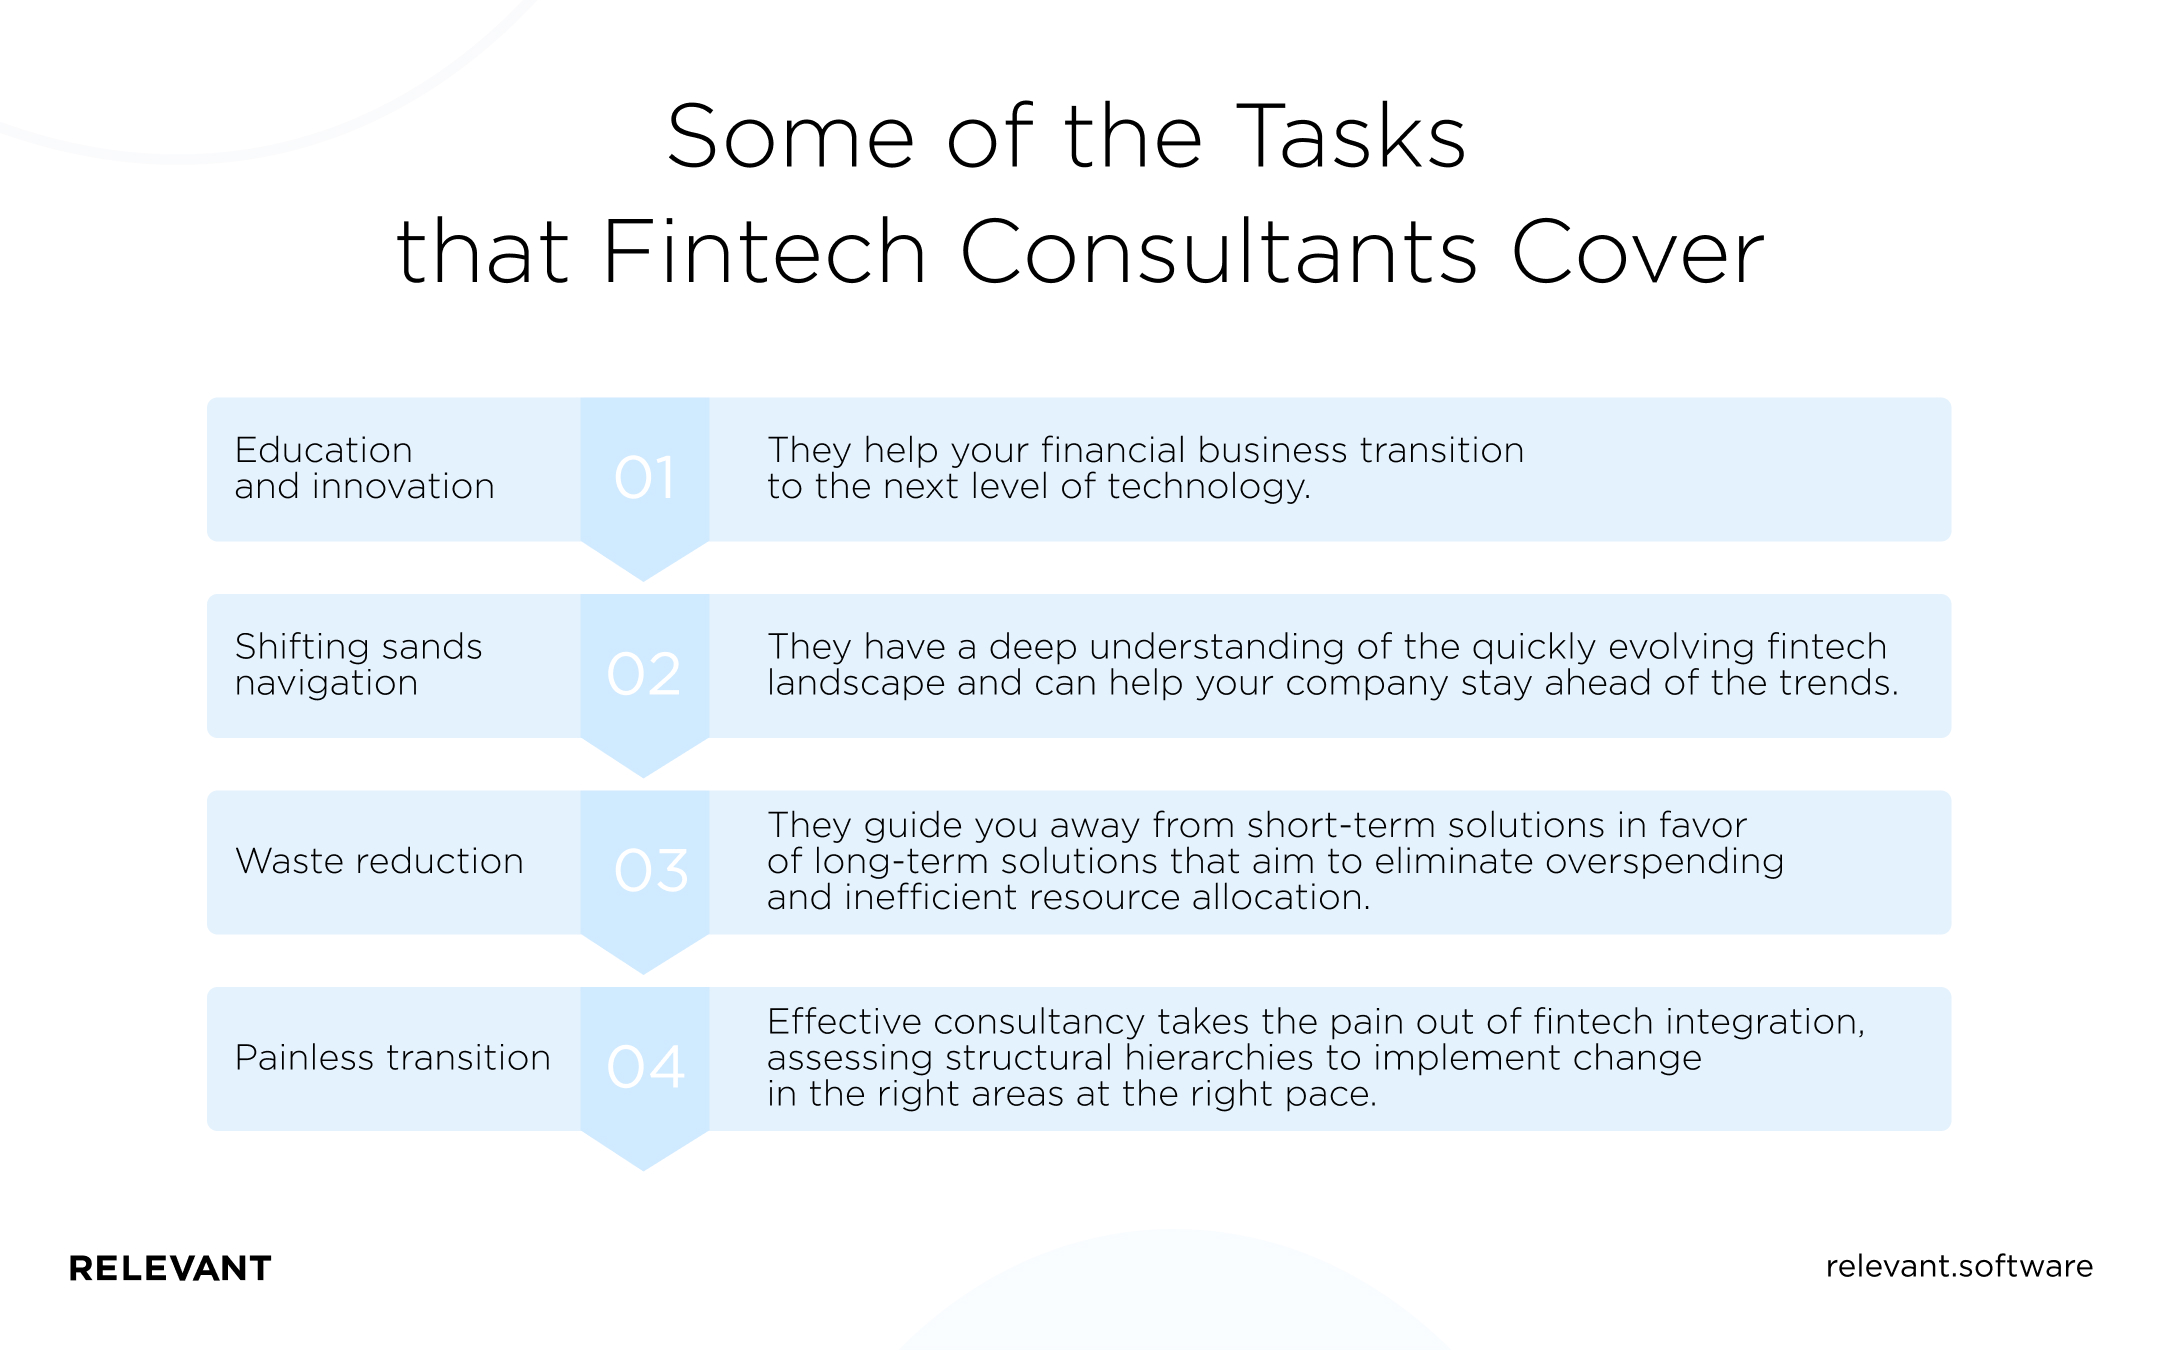 Tasks that Fintech Consultants Cover